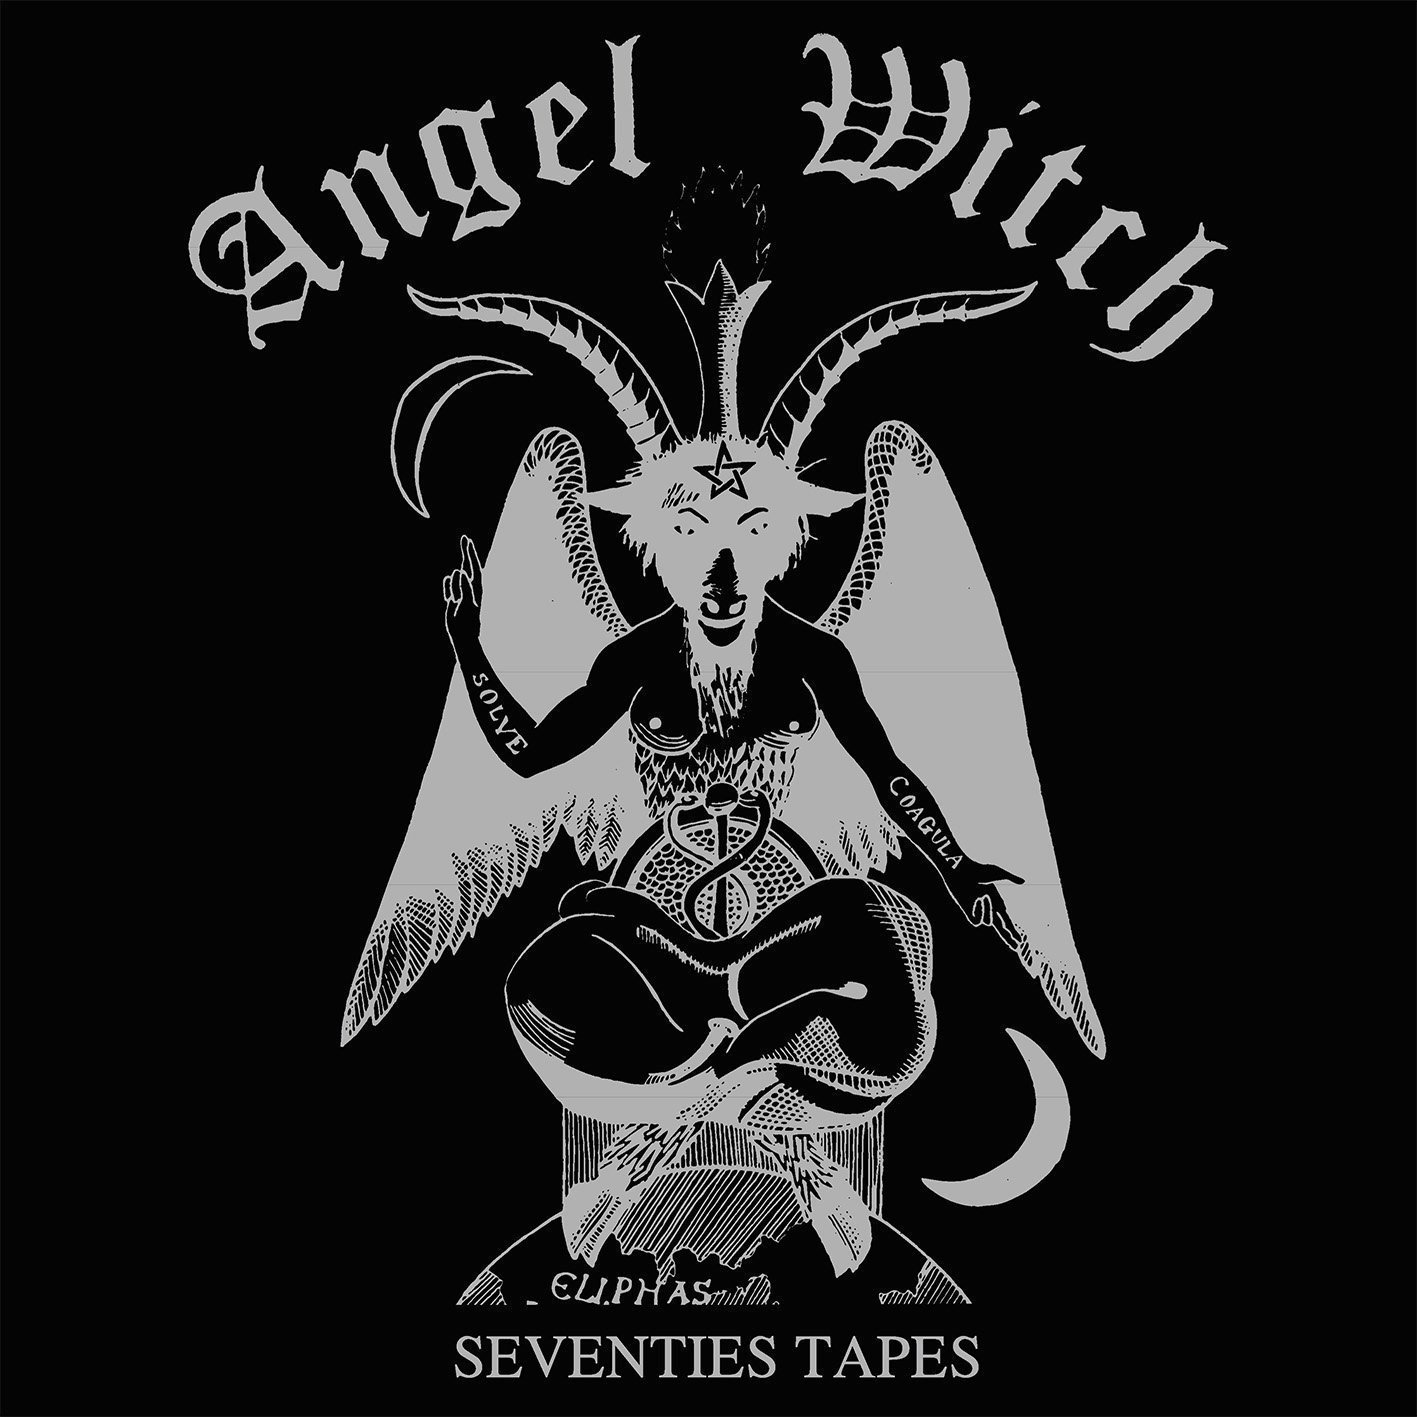 Angel Witch - Seventies Tapes (LP) Angel Witch